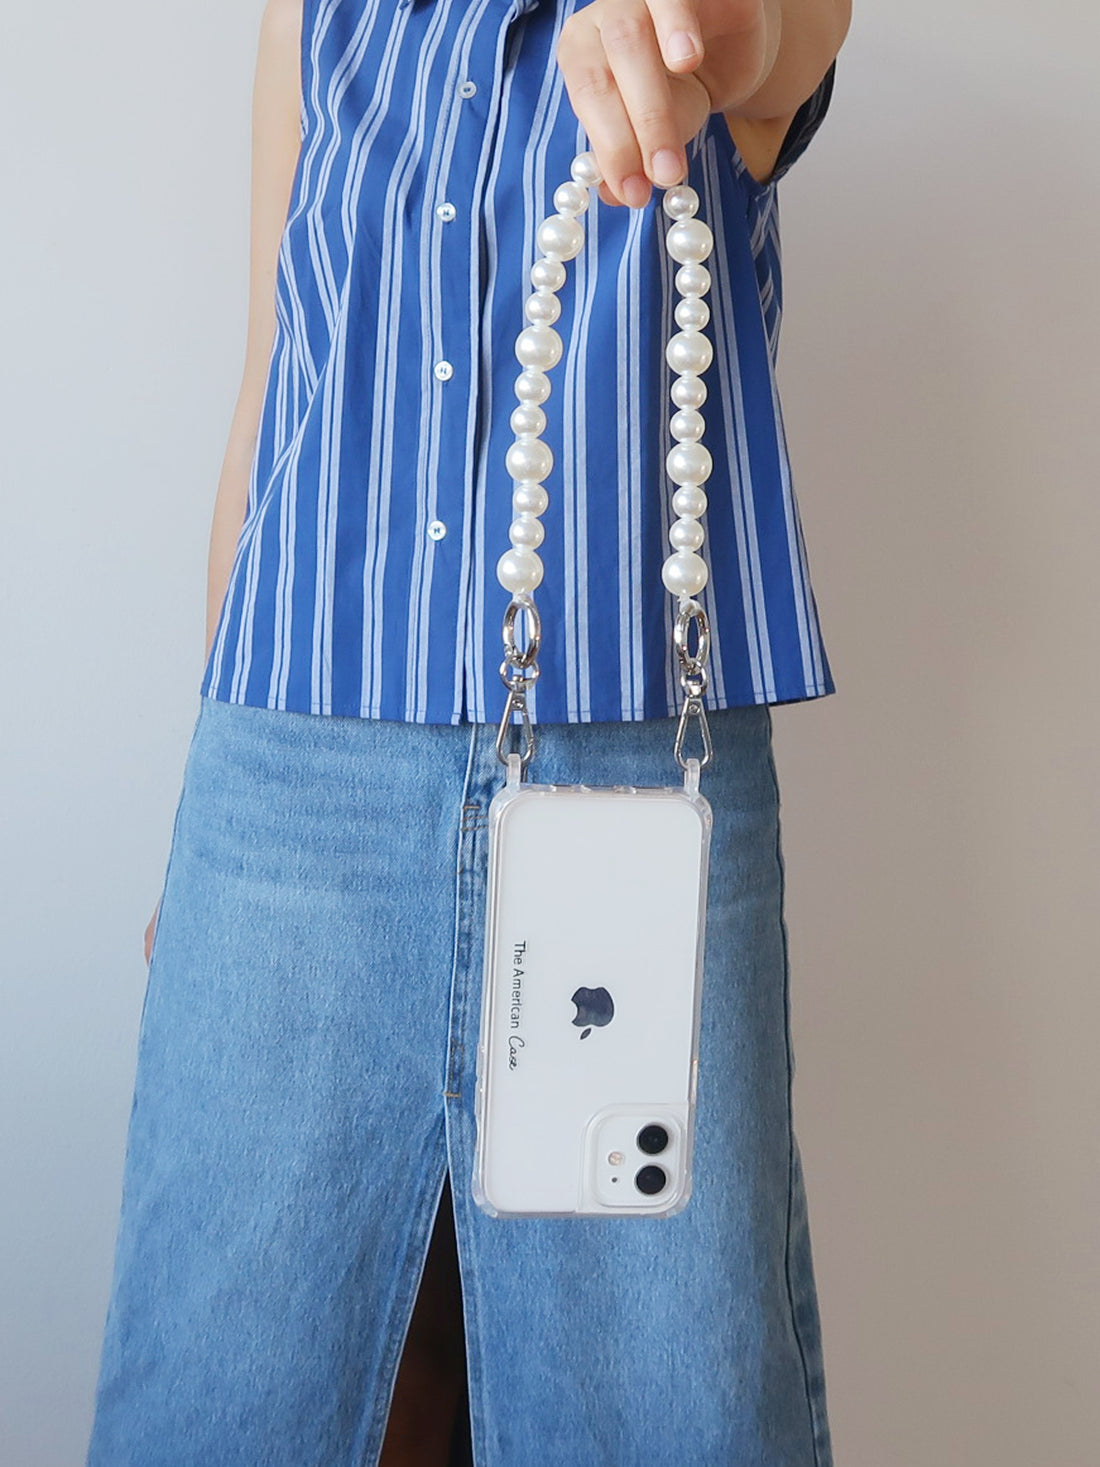 A short white pearl chain attached to phone hold by a lady